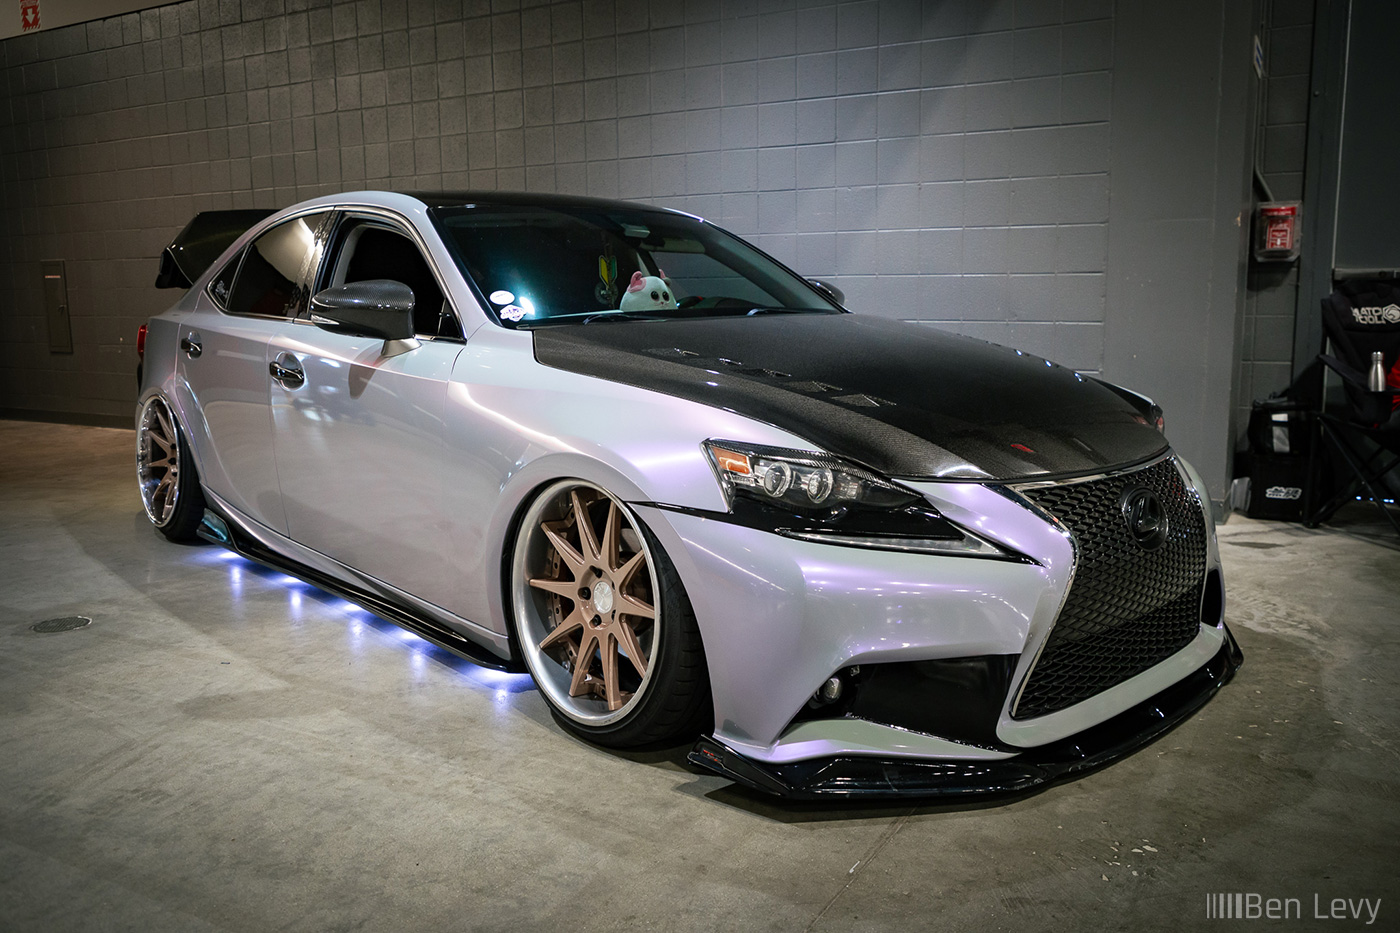 Bagged Lexus IS at Tuner Evo